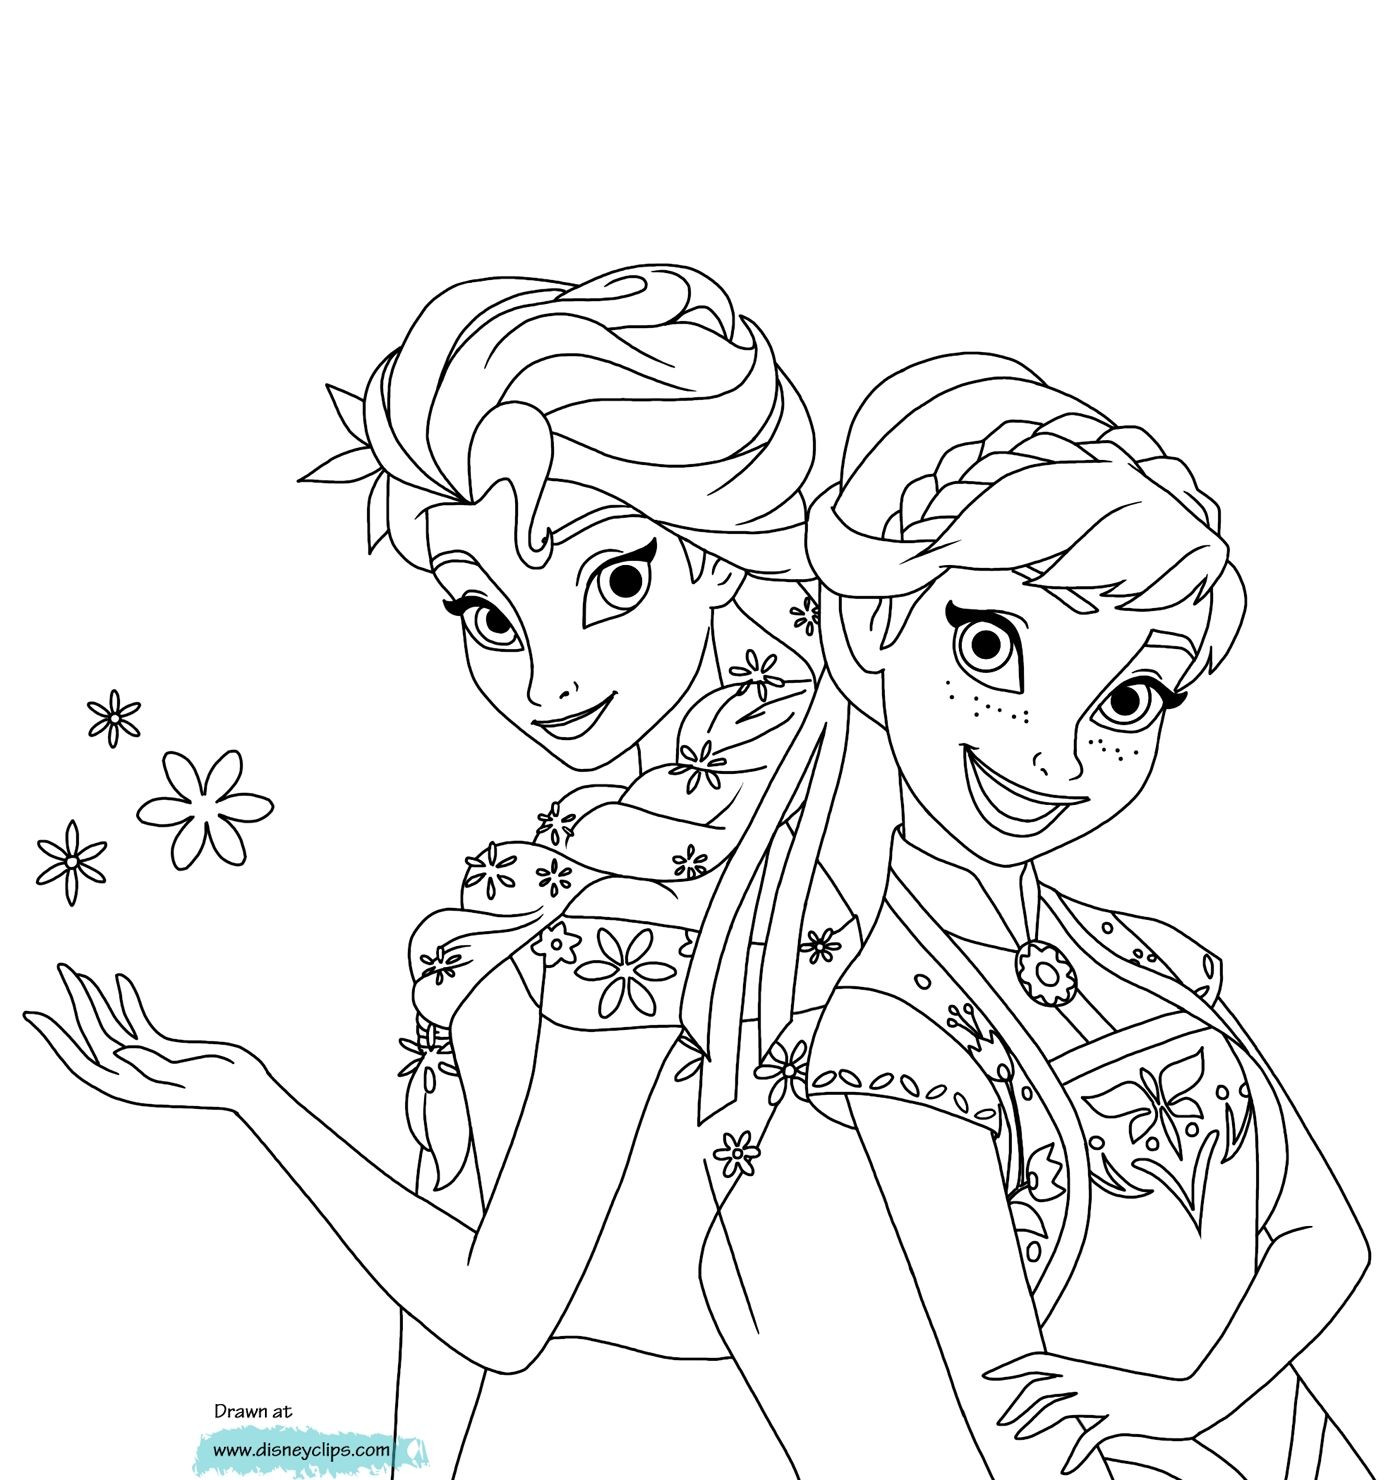 Let It Go Coloring Page at GetColorings.com | Free printable colorings